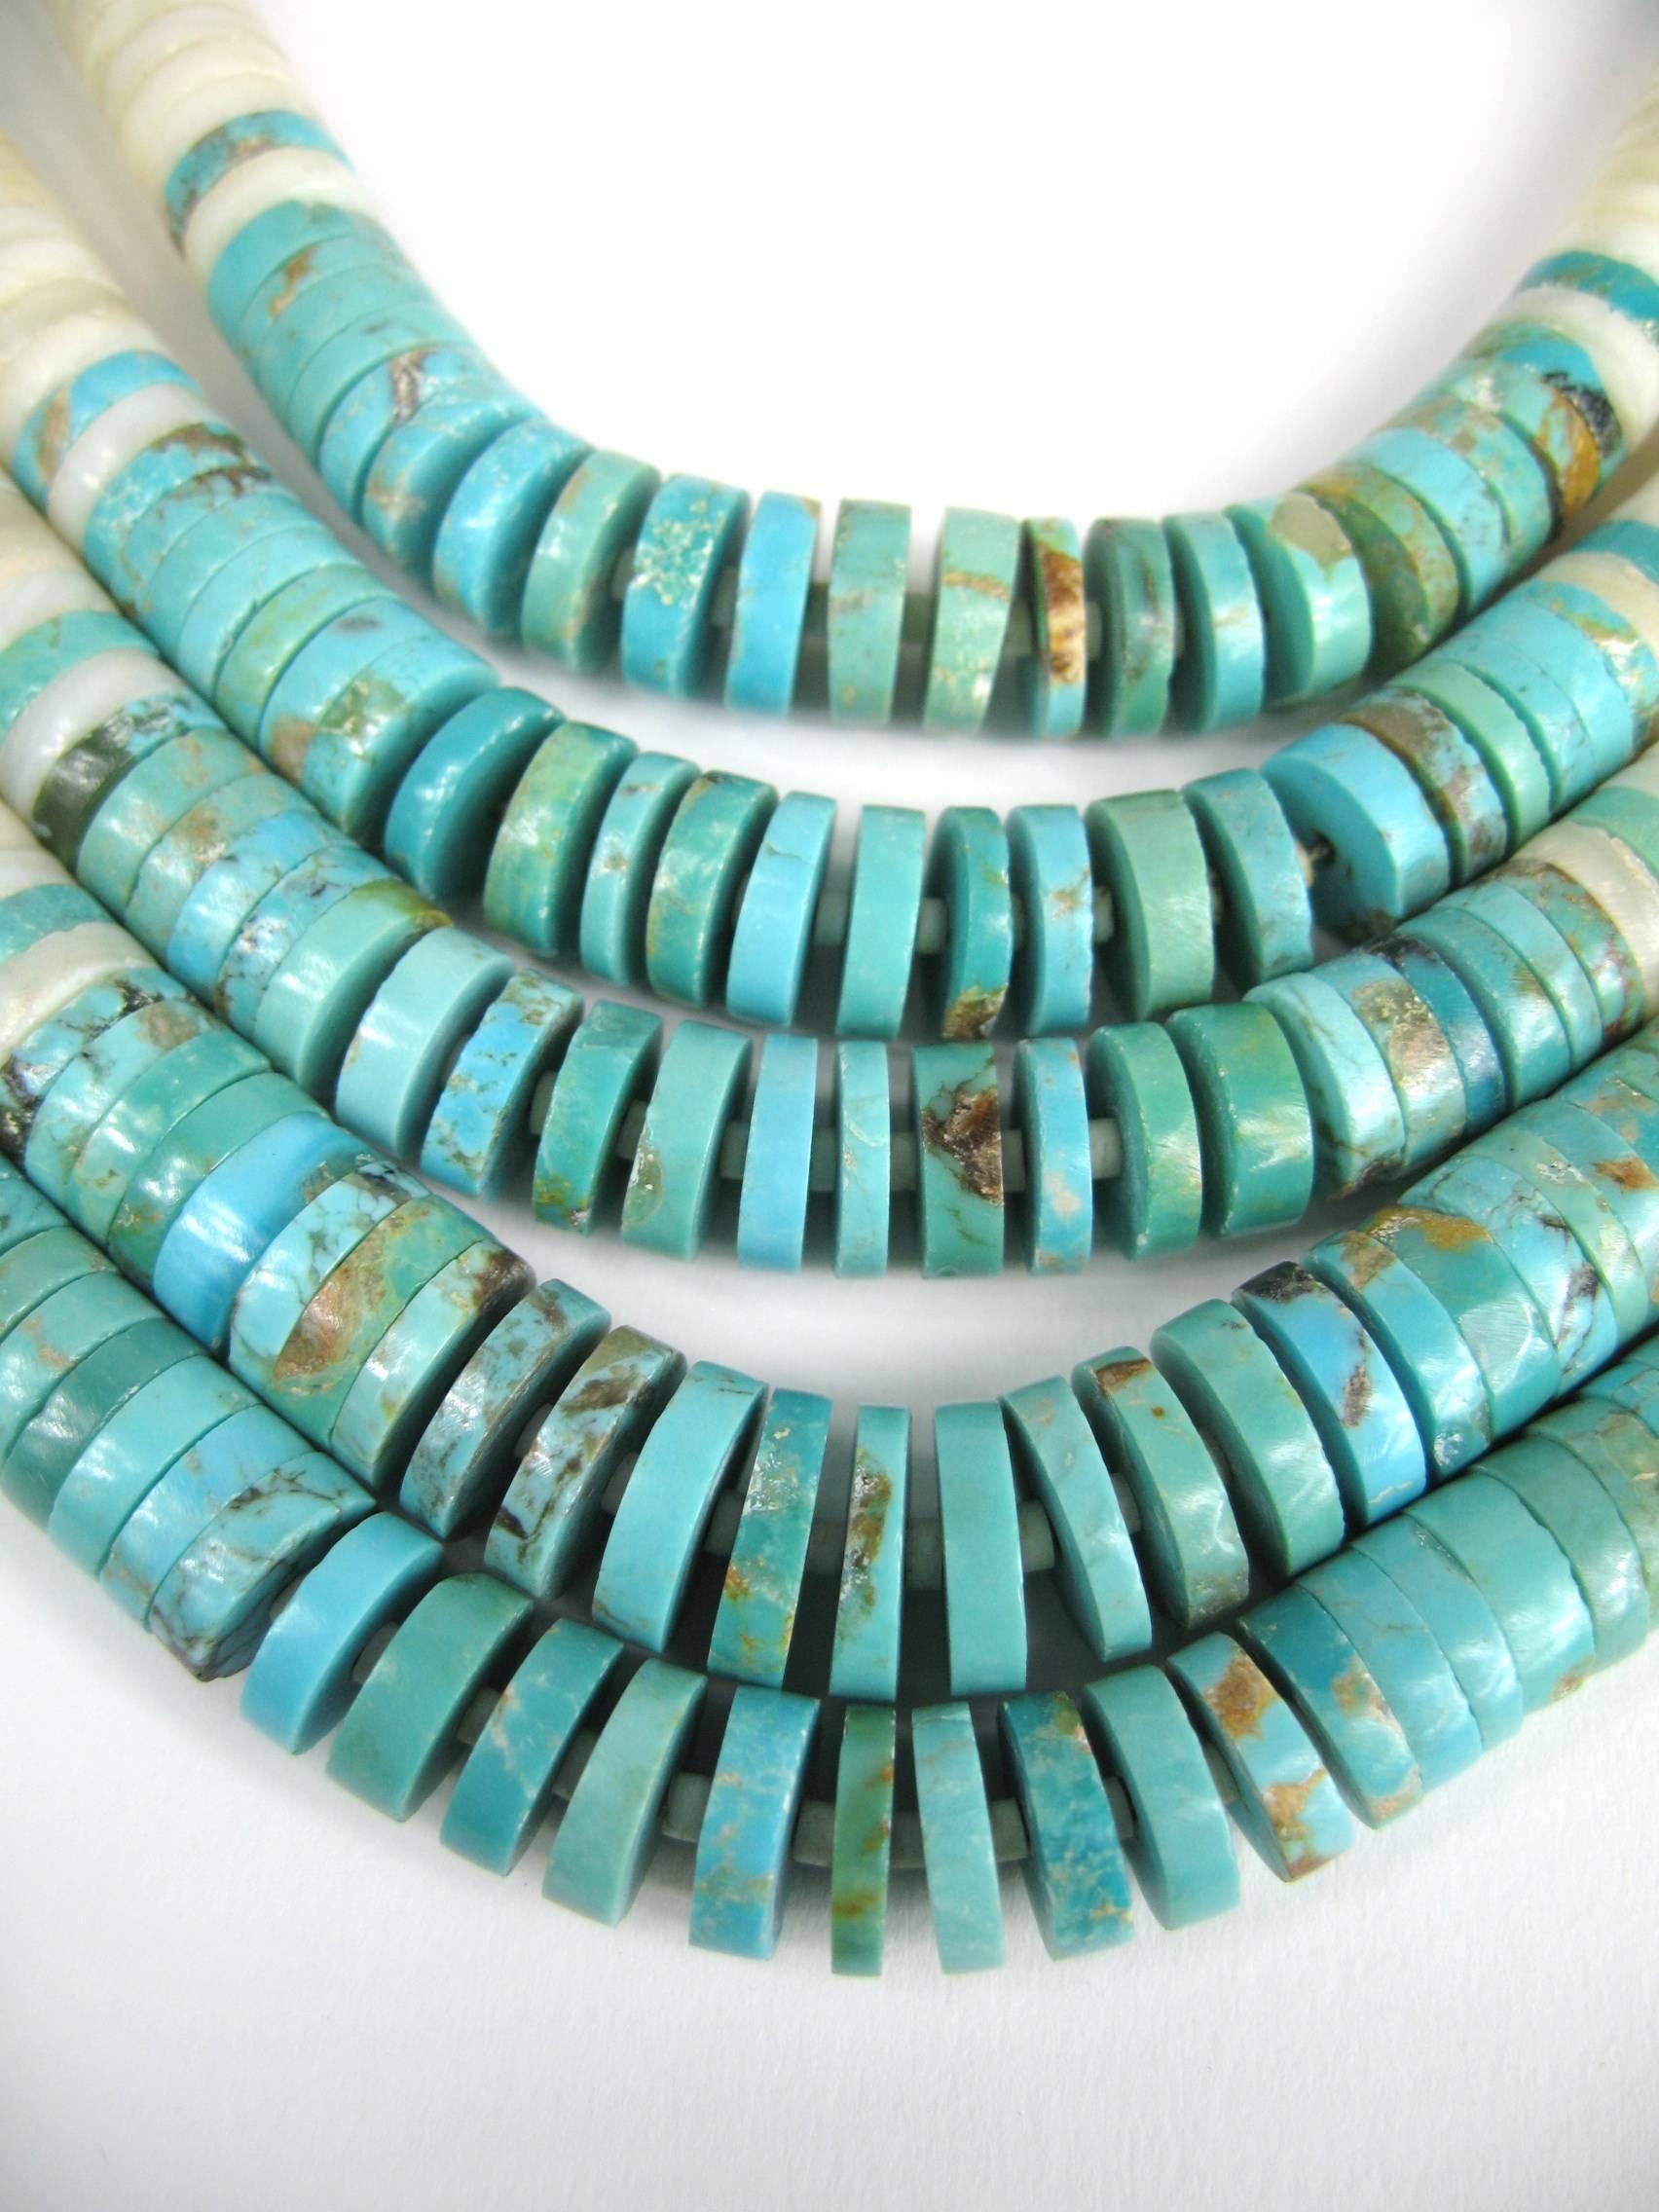 Stunning 5 strands Heishi Necklace with discs of graduated Turquoise and shell 11.66 mm down to 4mm attached to large Turquoise stations then onto more turquoise beads. Sterling silver finding at the end. The necklace is strung on original string.